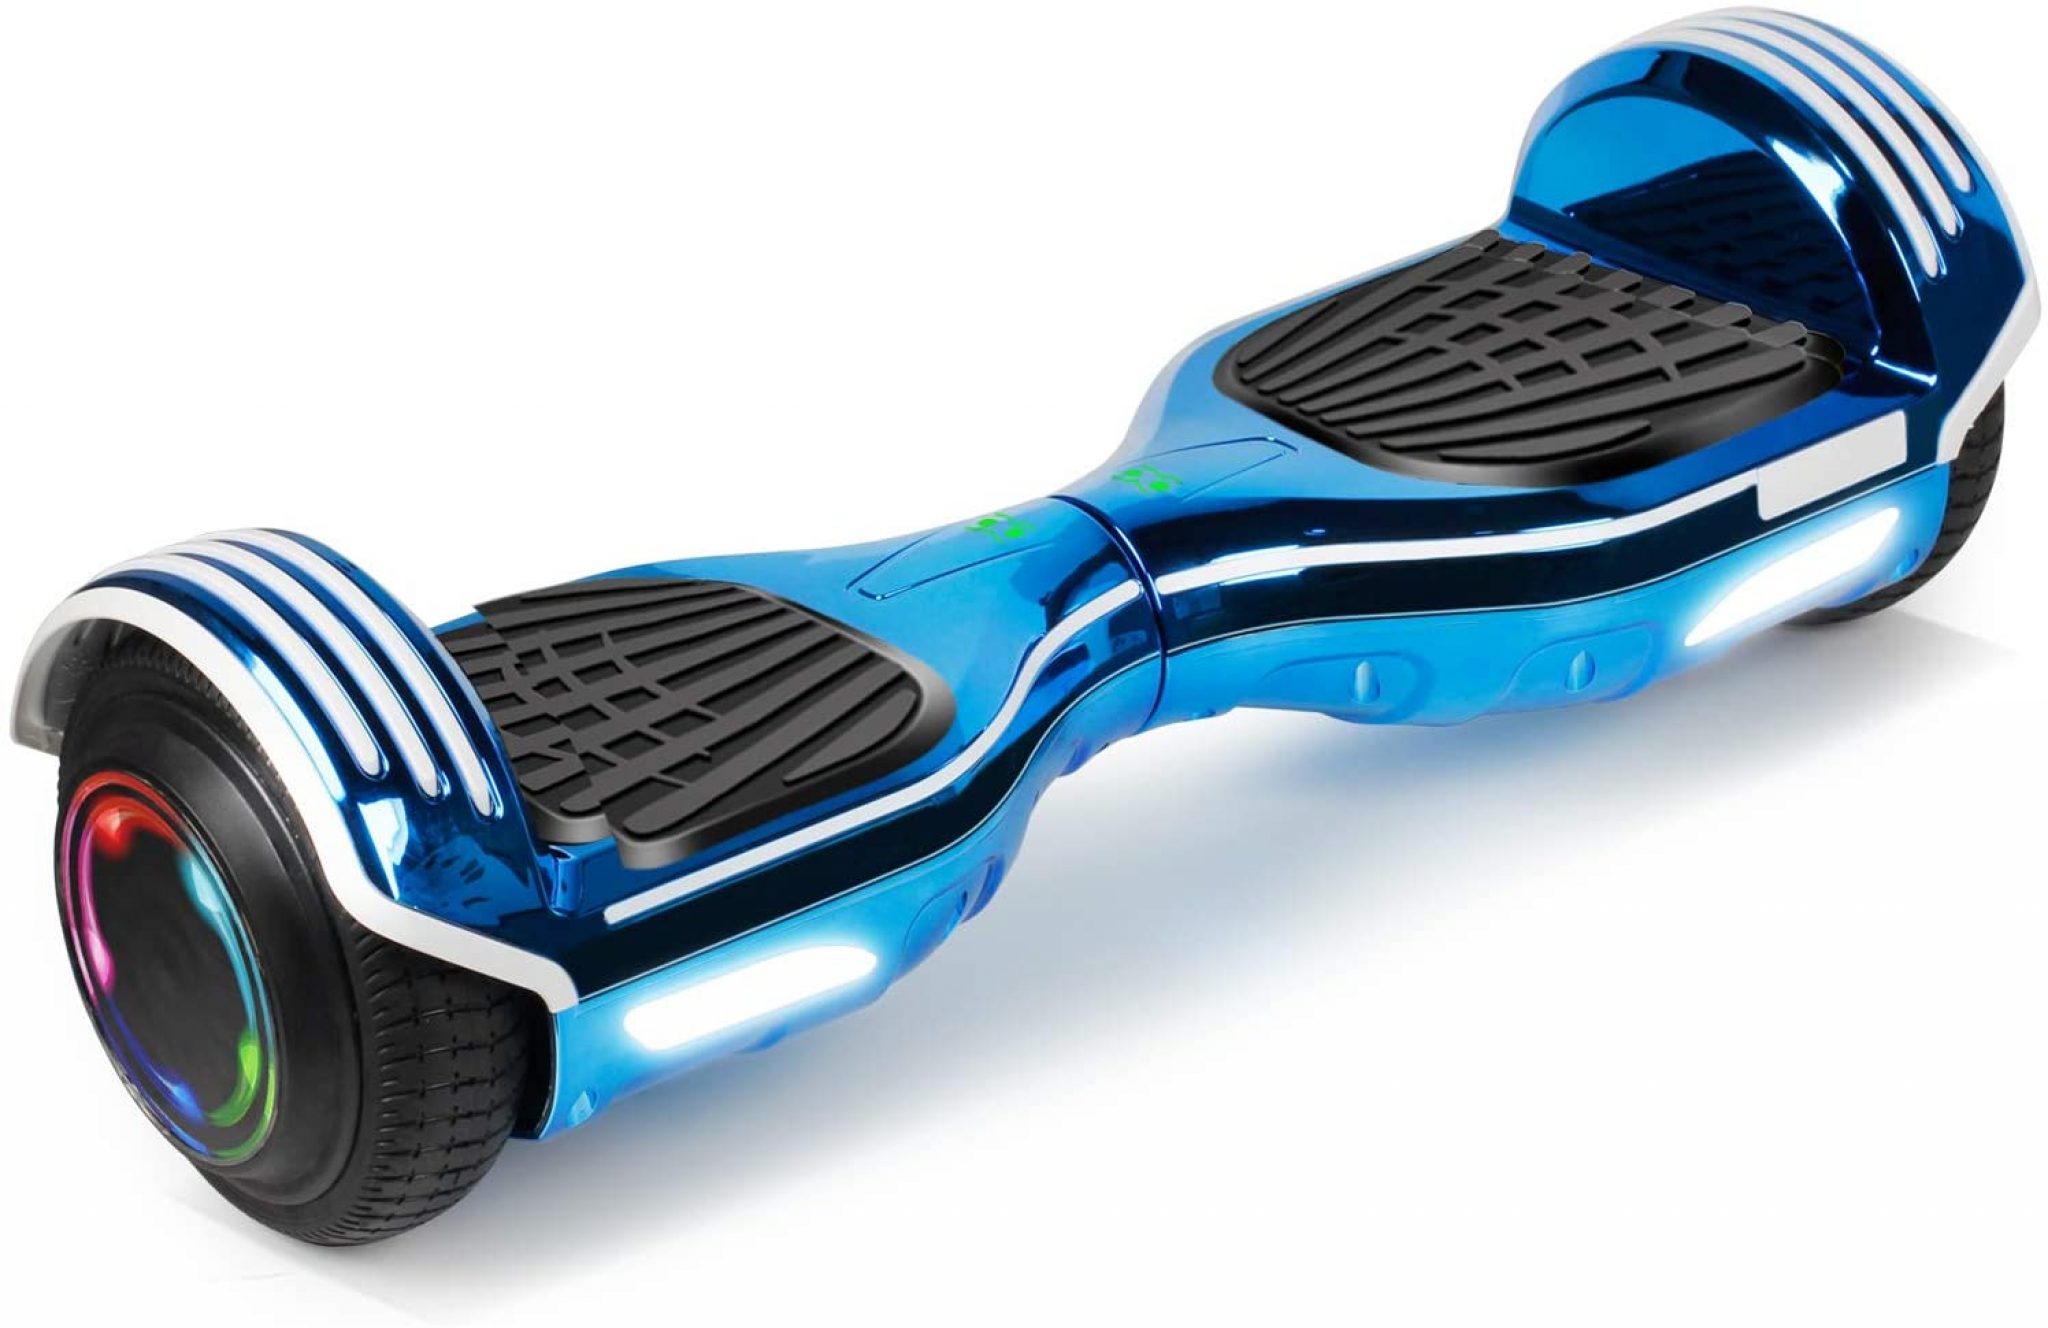 Best Mini Hoverboard For Kids in 2021 | HoverBoardsGuides